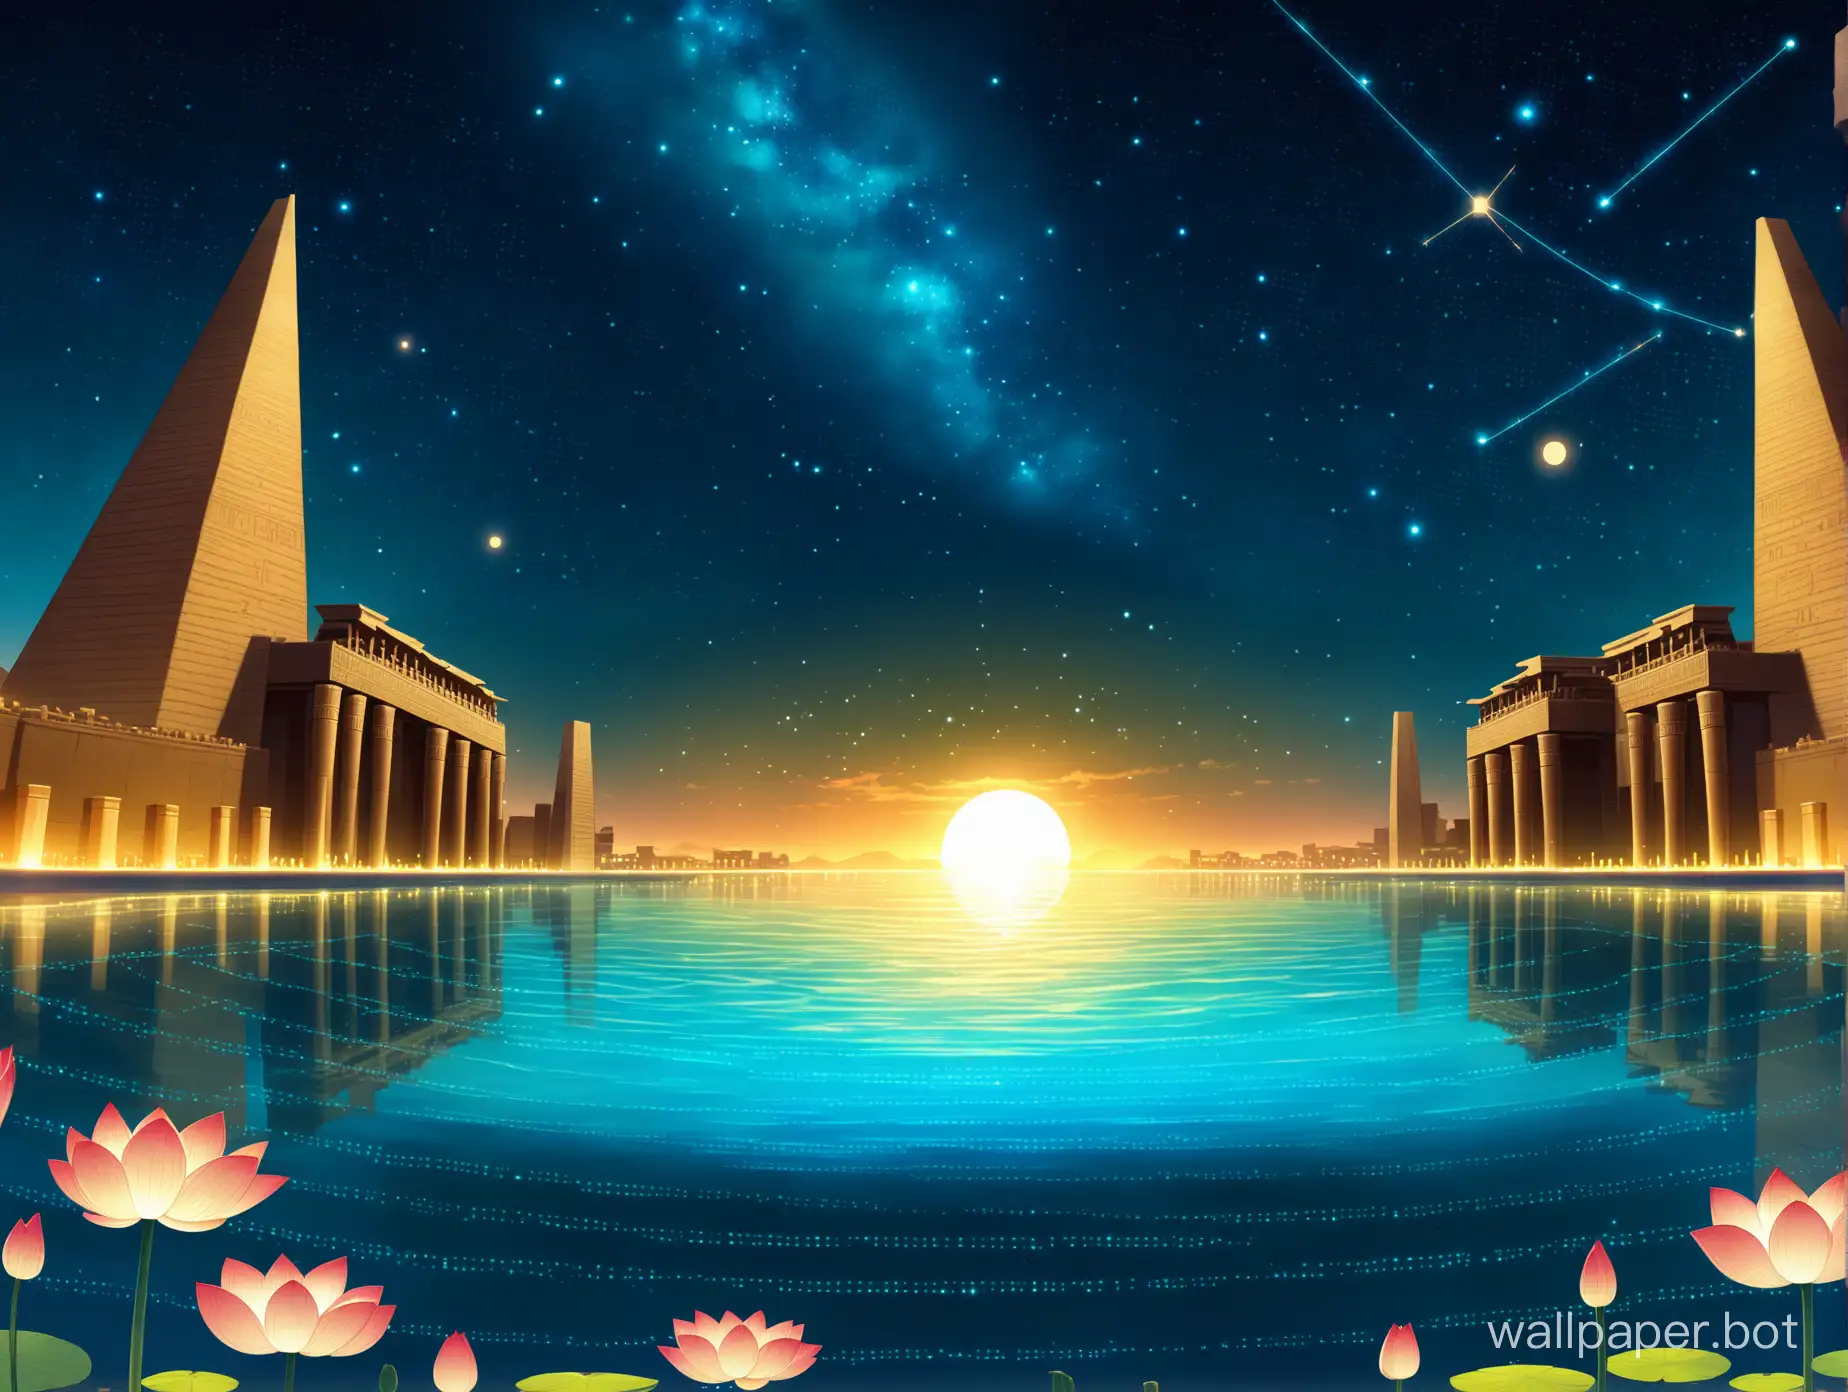 2d fighting game stage, floor level, atemporal mystic battleground of the gods, set in legendary Egypt Karkat at night, ancient giant Egypt buildings and monumental ruins of ancient gods under a constellation sky with the floor slowly bathed by the Nile waters and colossal lotus flowers, lit from bottom to top